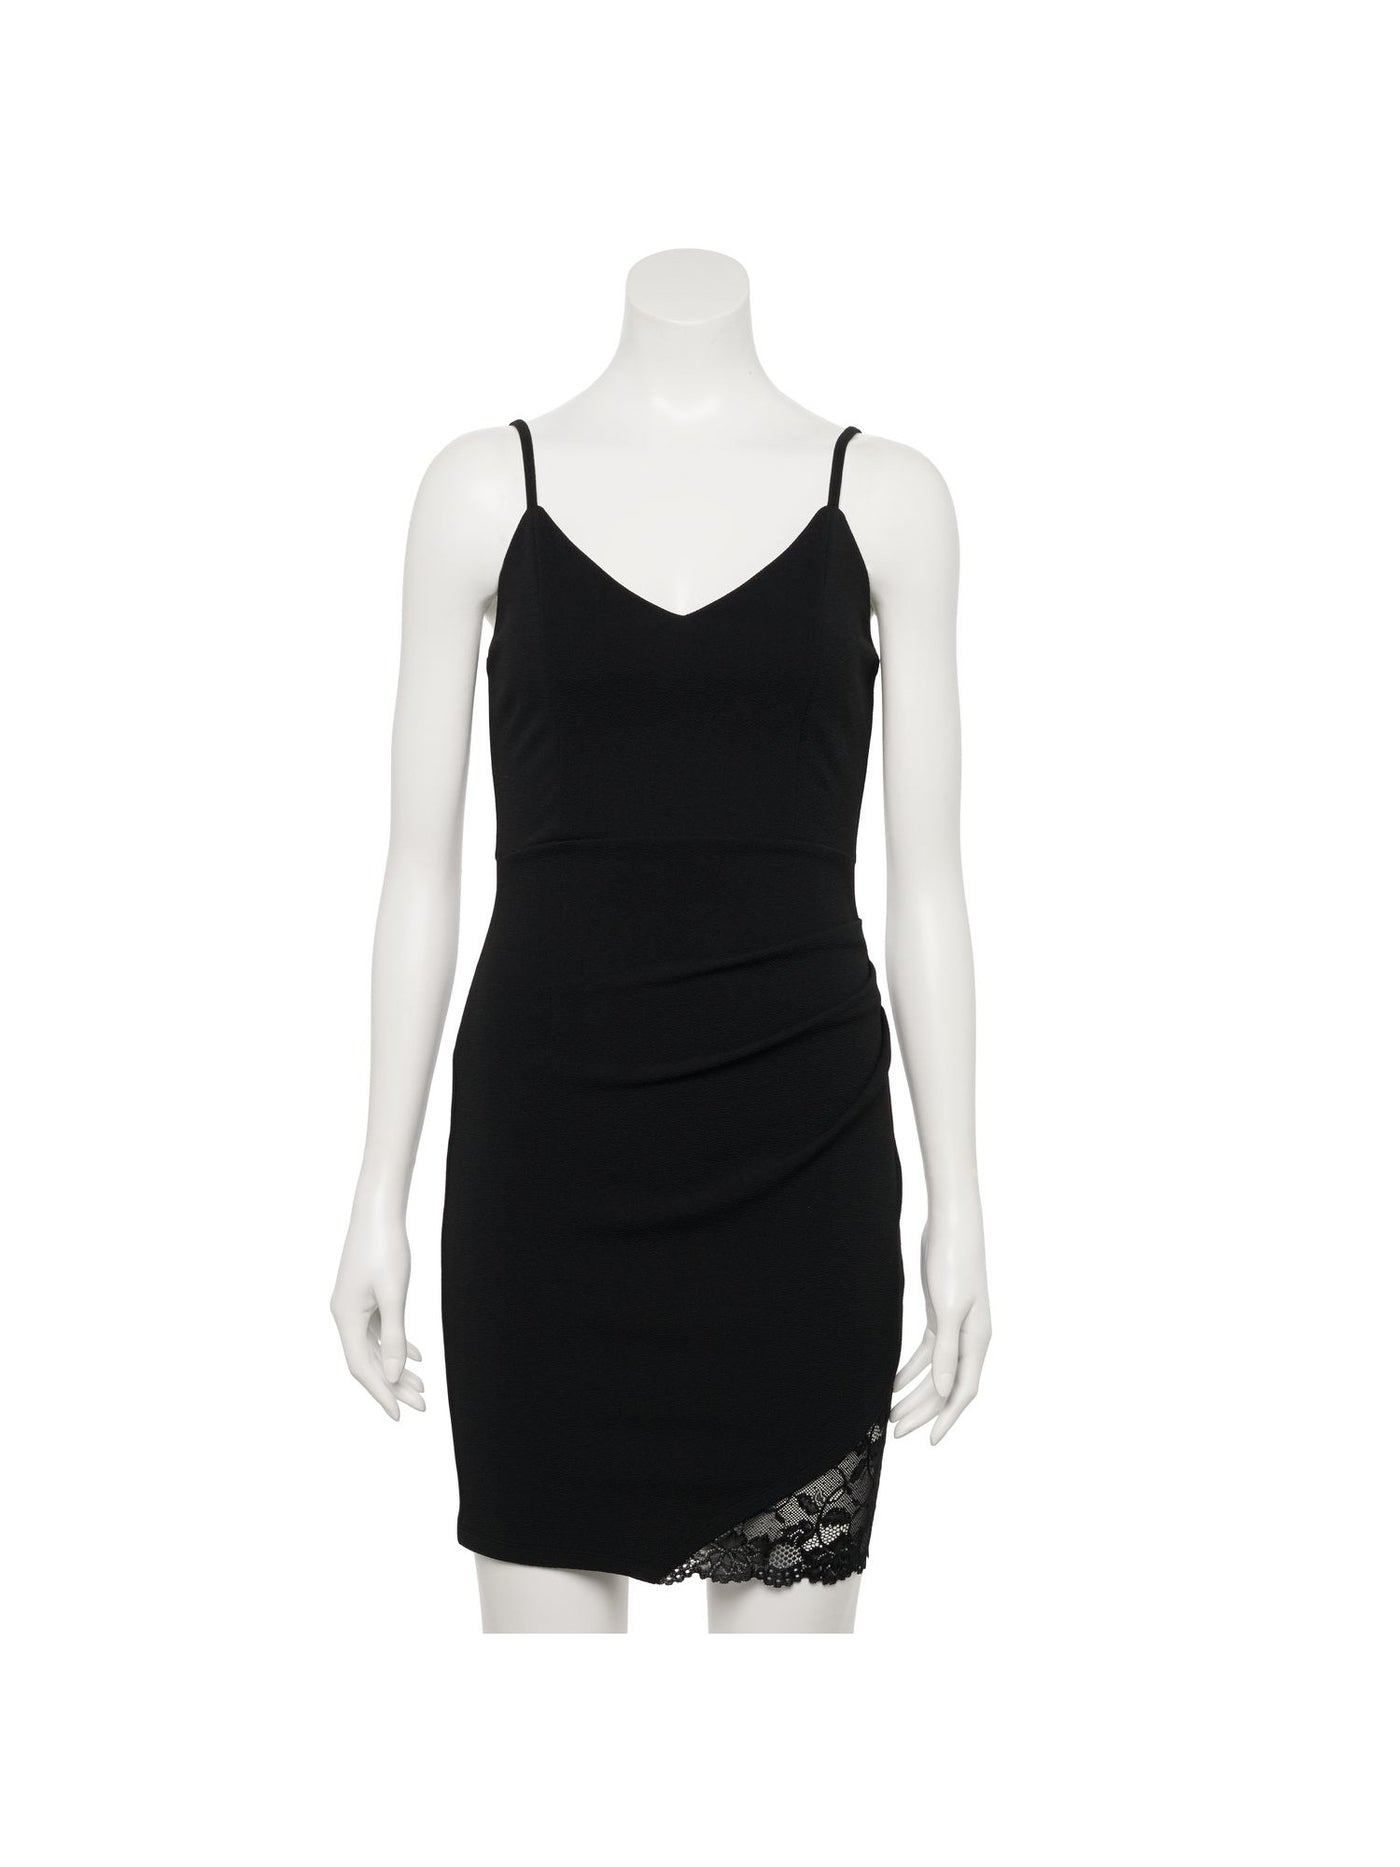 ALMOST FAMOUS Womens Black Spaghetti Strap V Neck Above The Knee Party Sheath Dress Juniors XL